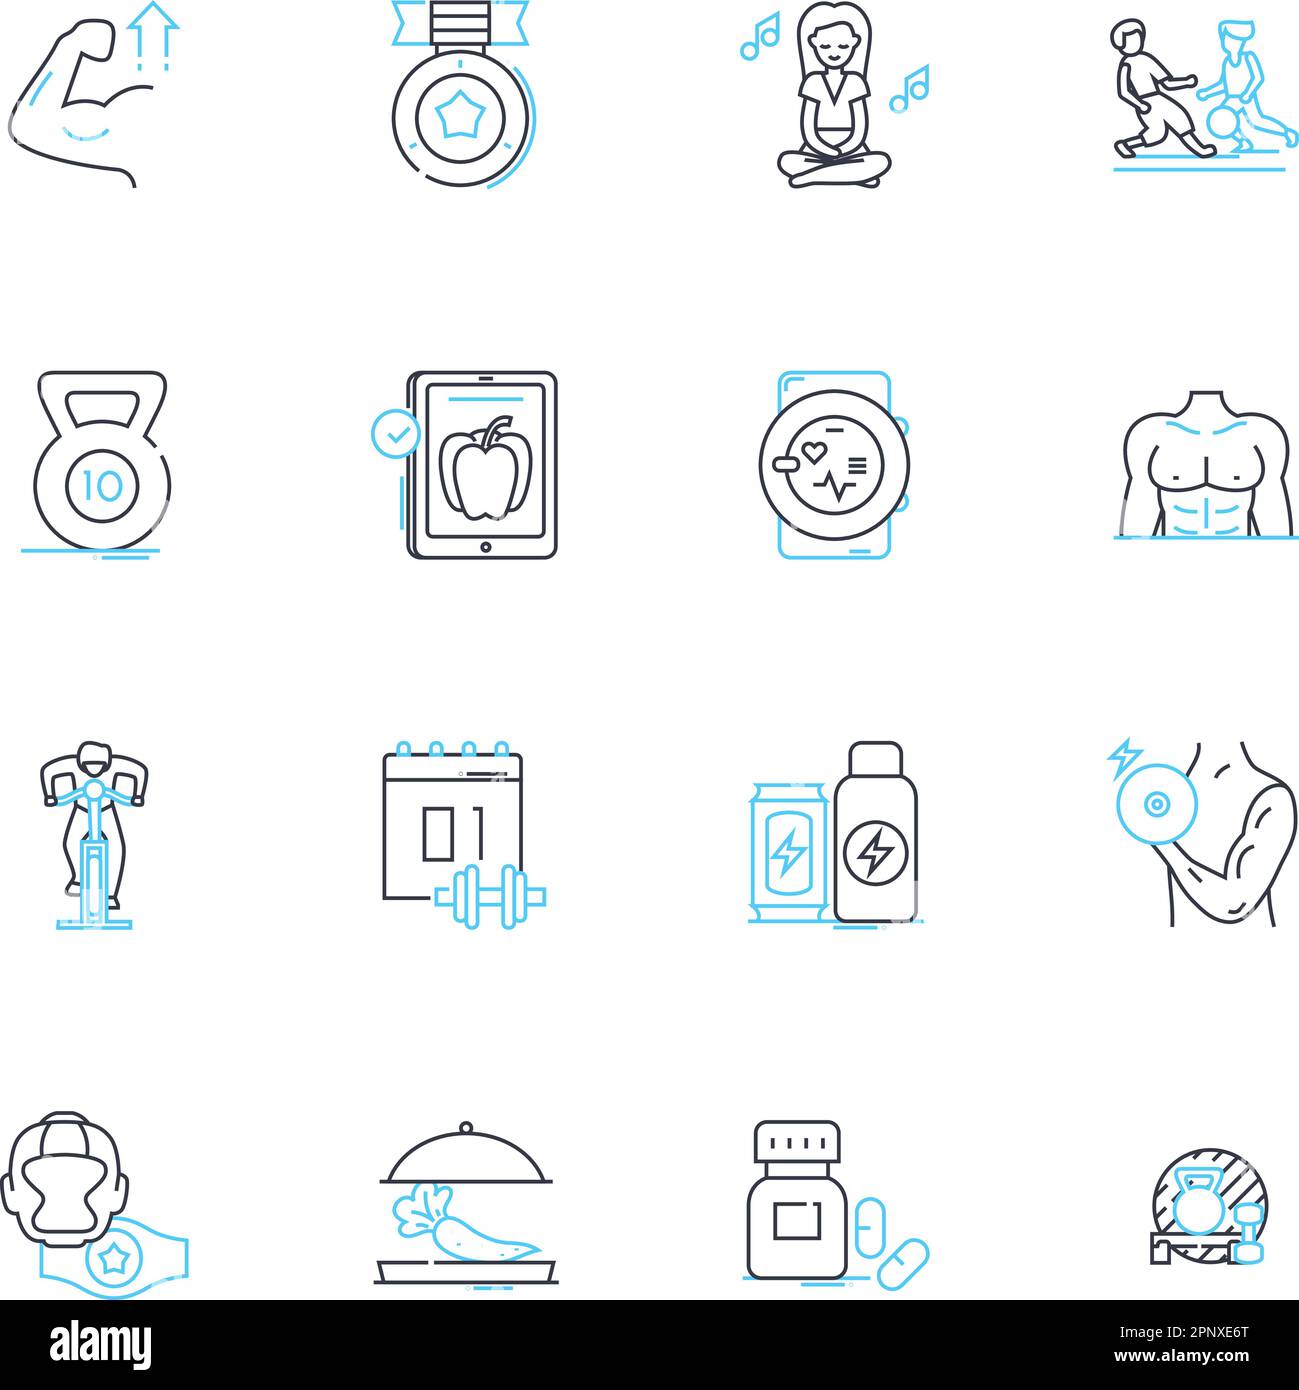 Swim laps linear icons set. Endurance, Stroke, Pool, Fitness, Exercise, Cardio, Routine line vector and concept signs. Technique,Timing,Repetition Stock Vector